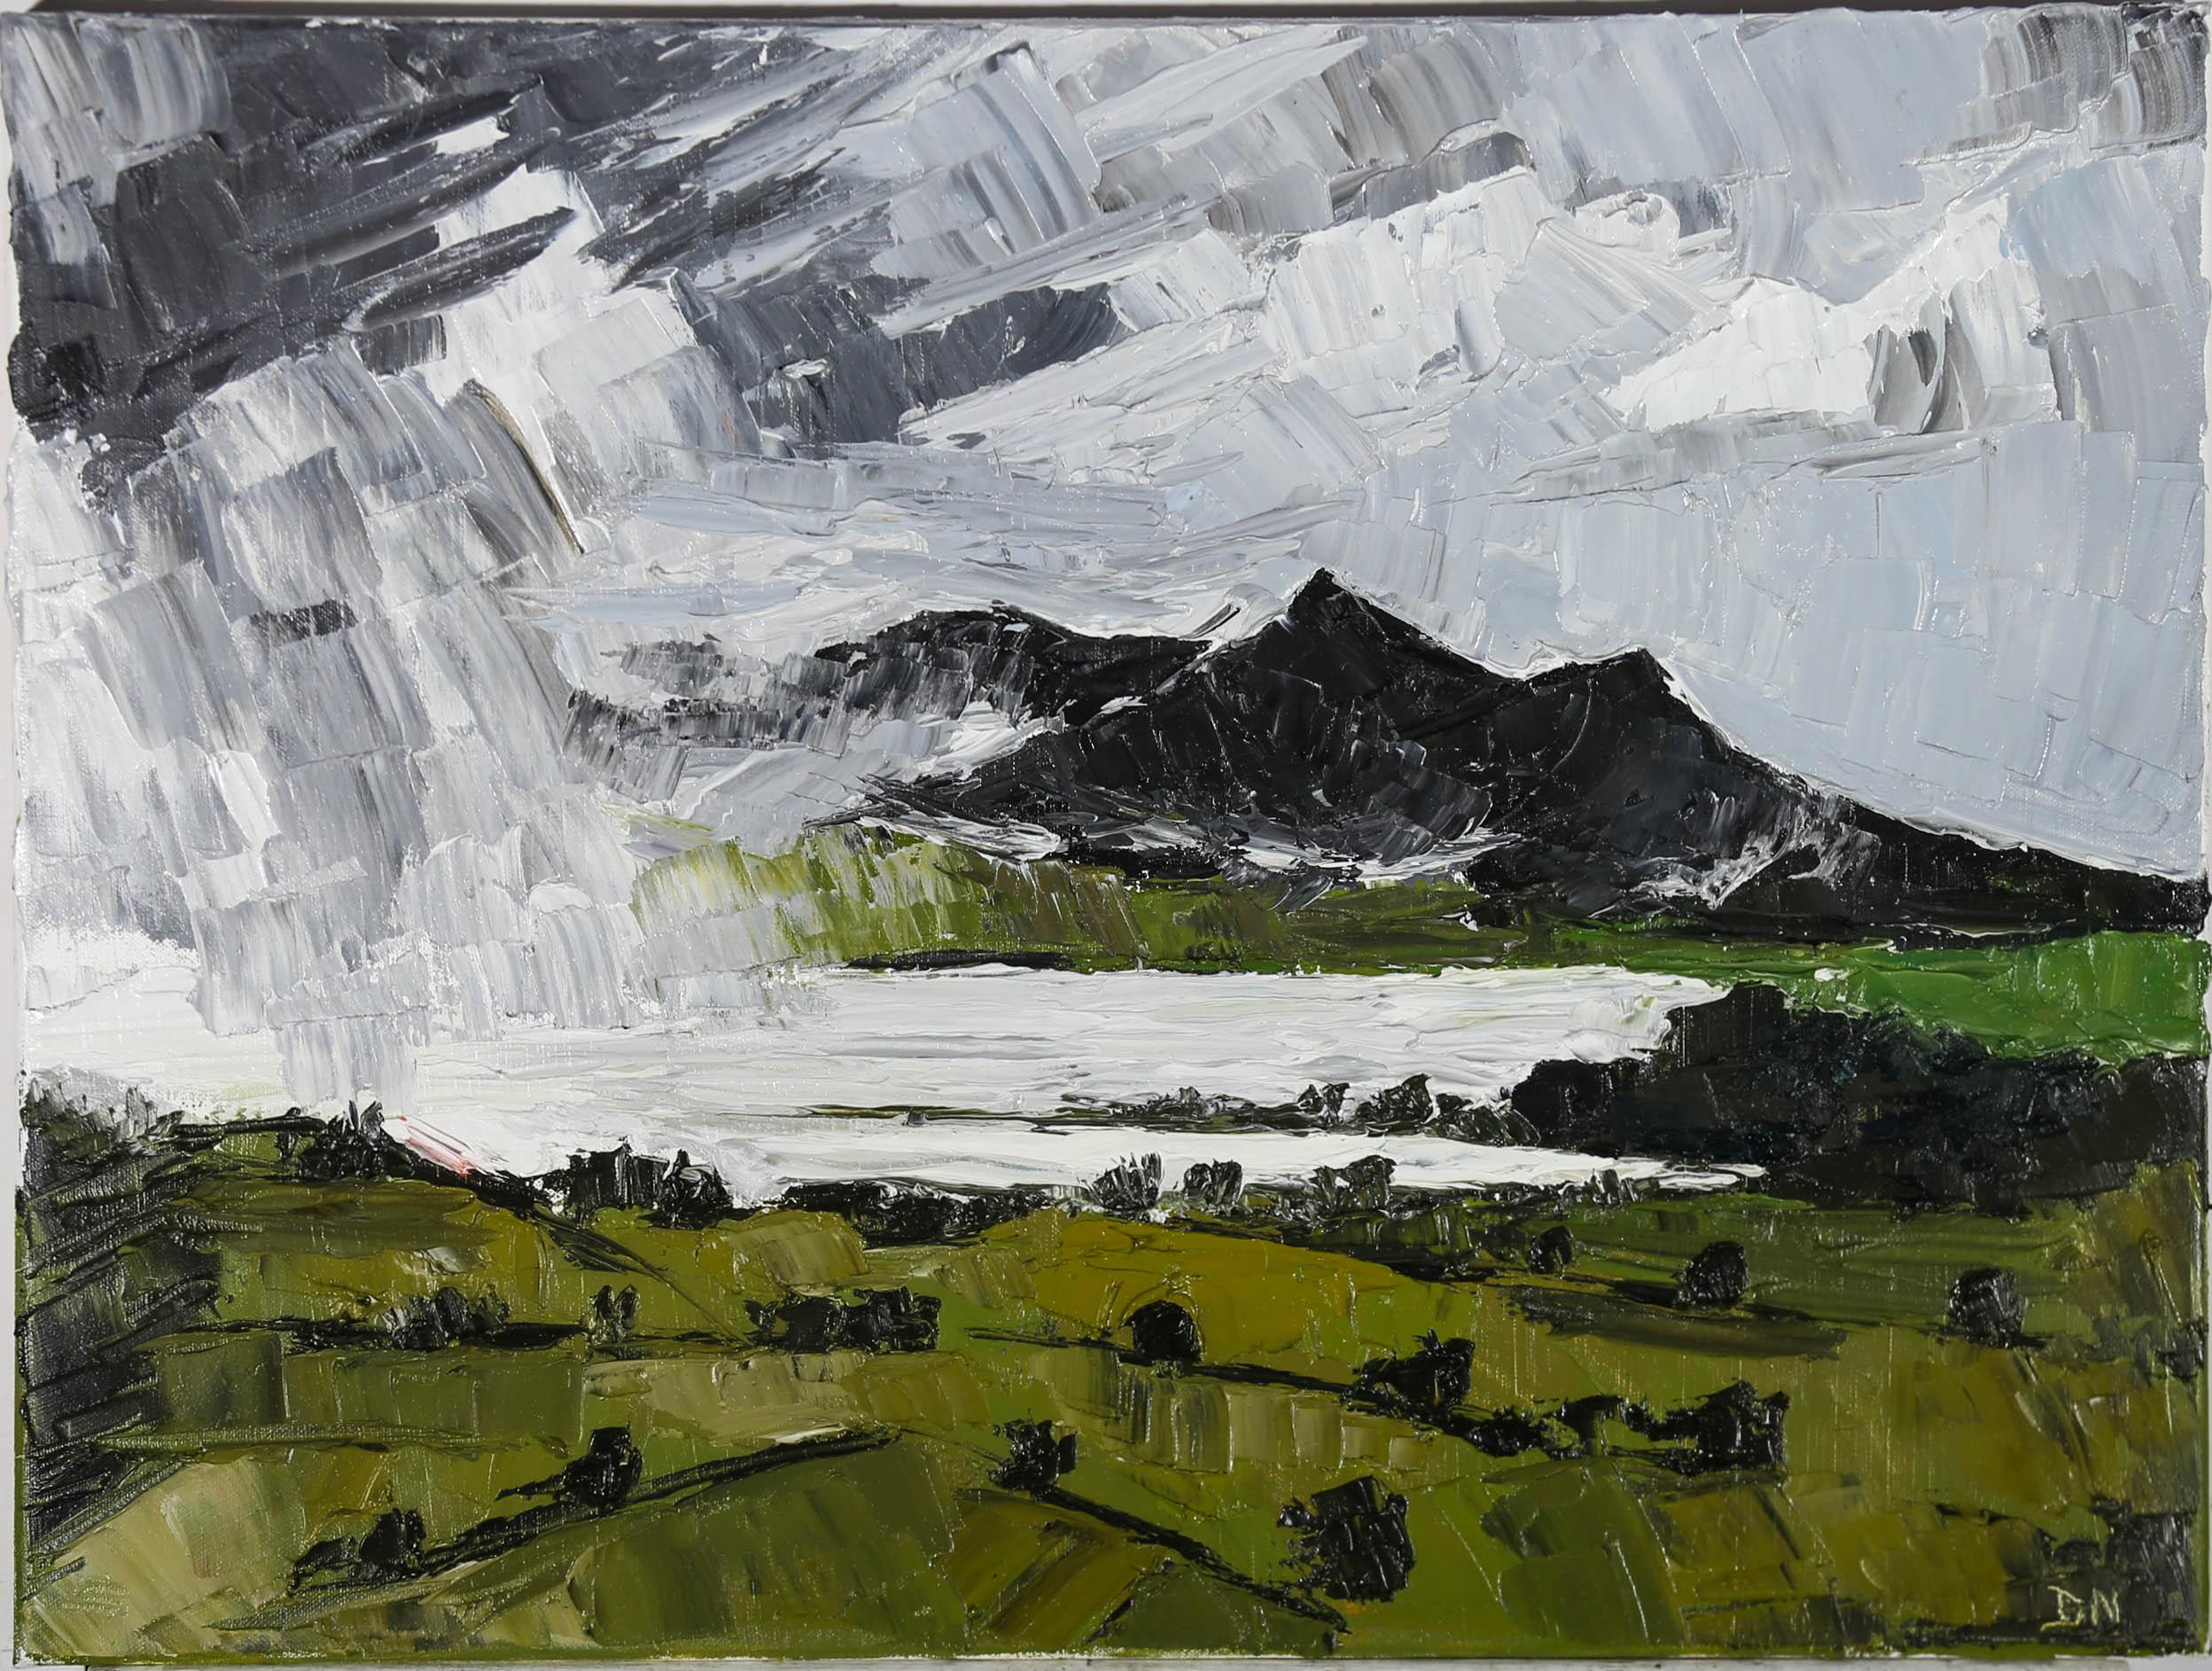 kyffin williams art for sale